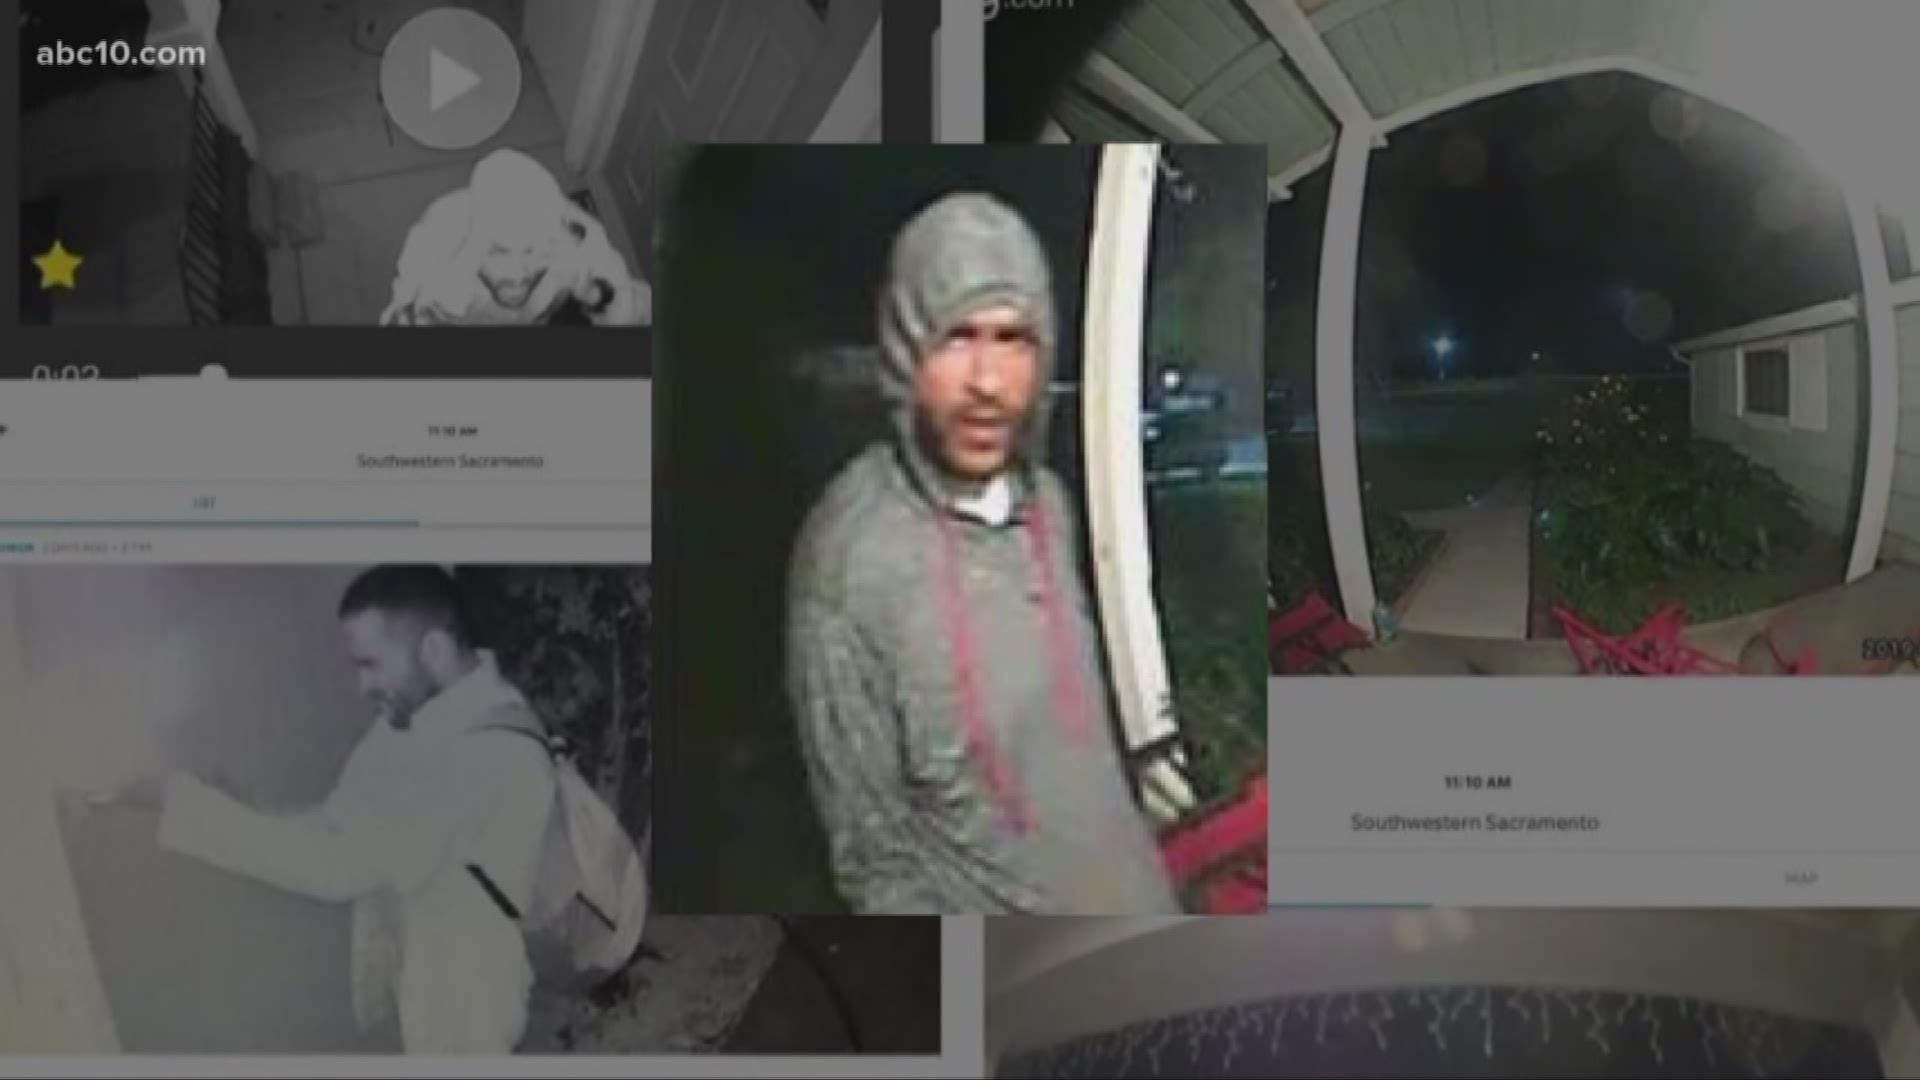 Before the cameras were stolen, they captured a man taking them right off five separate homes in one night.